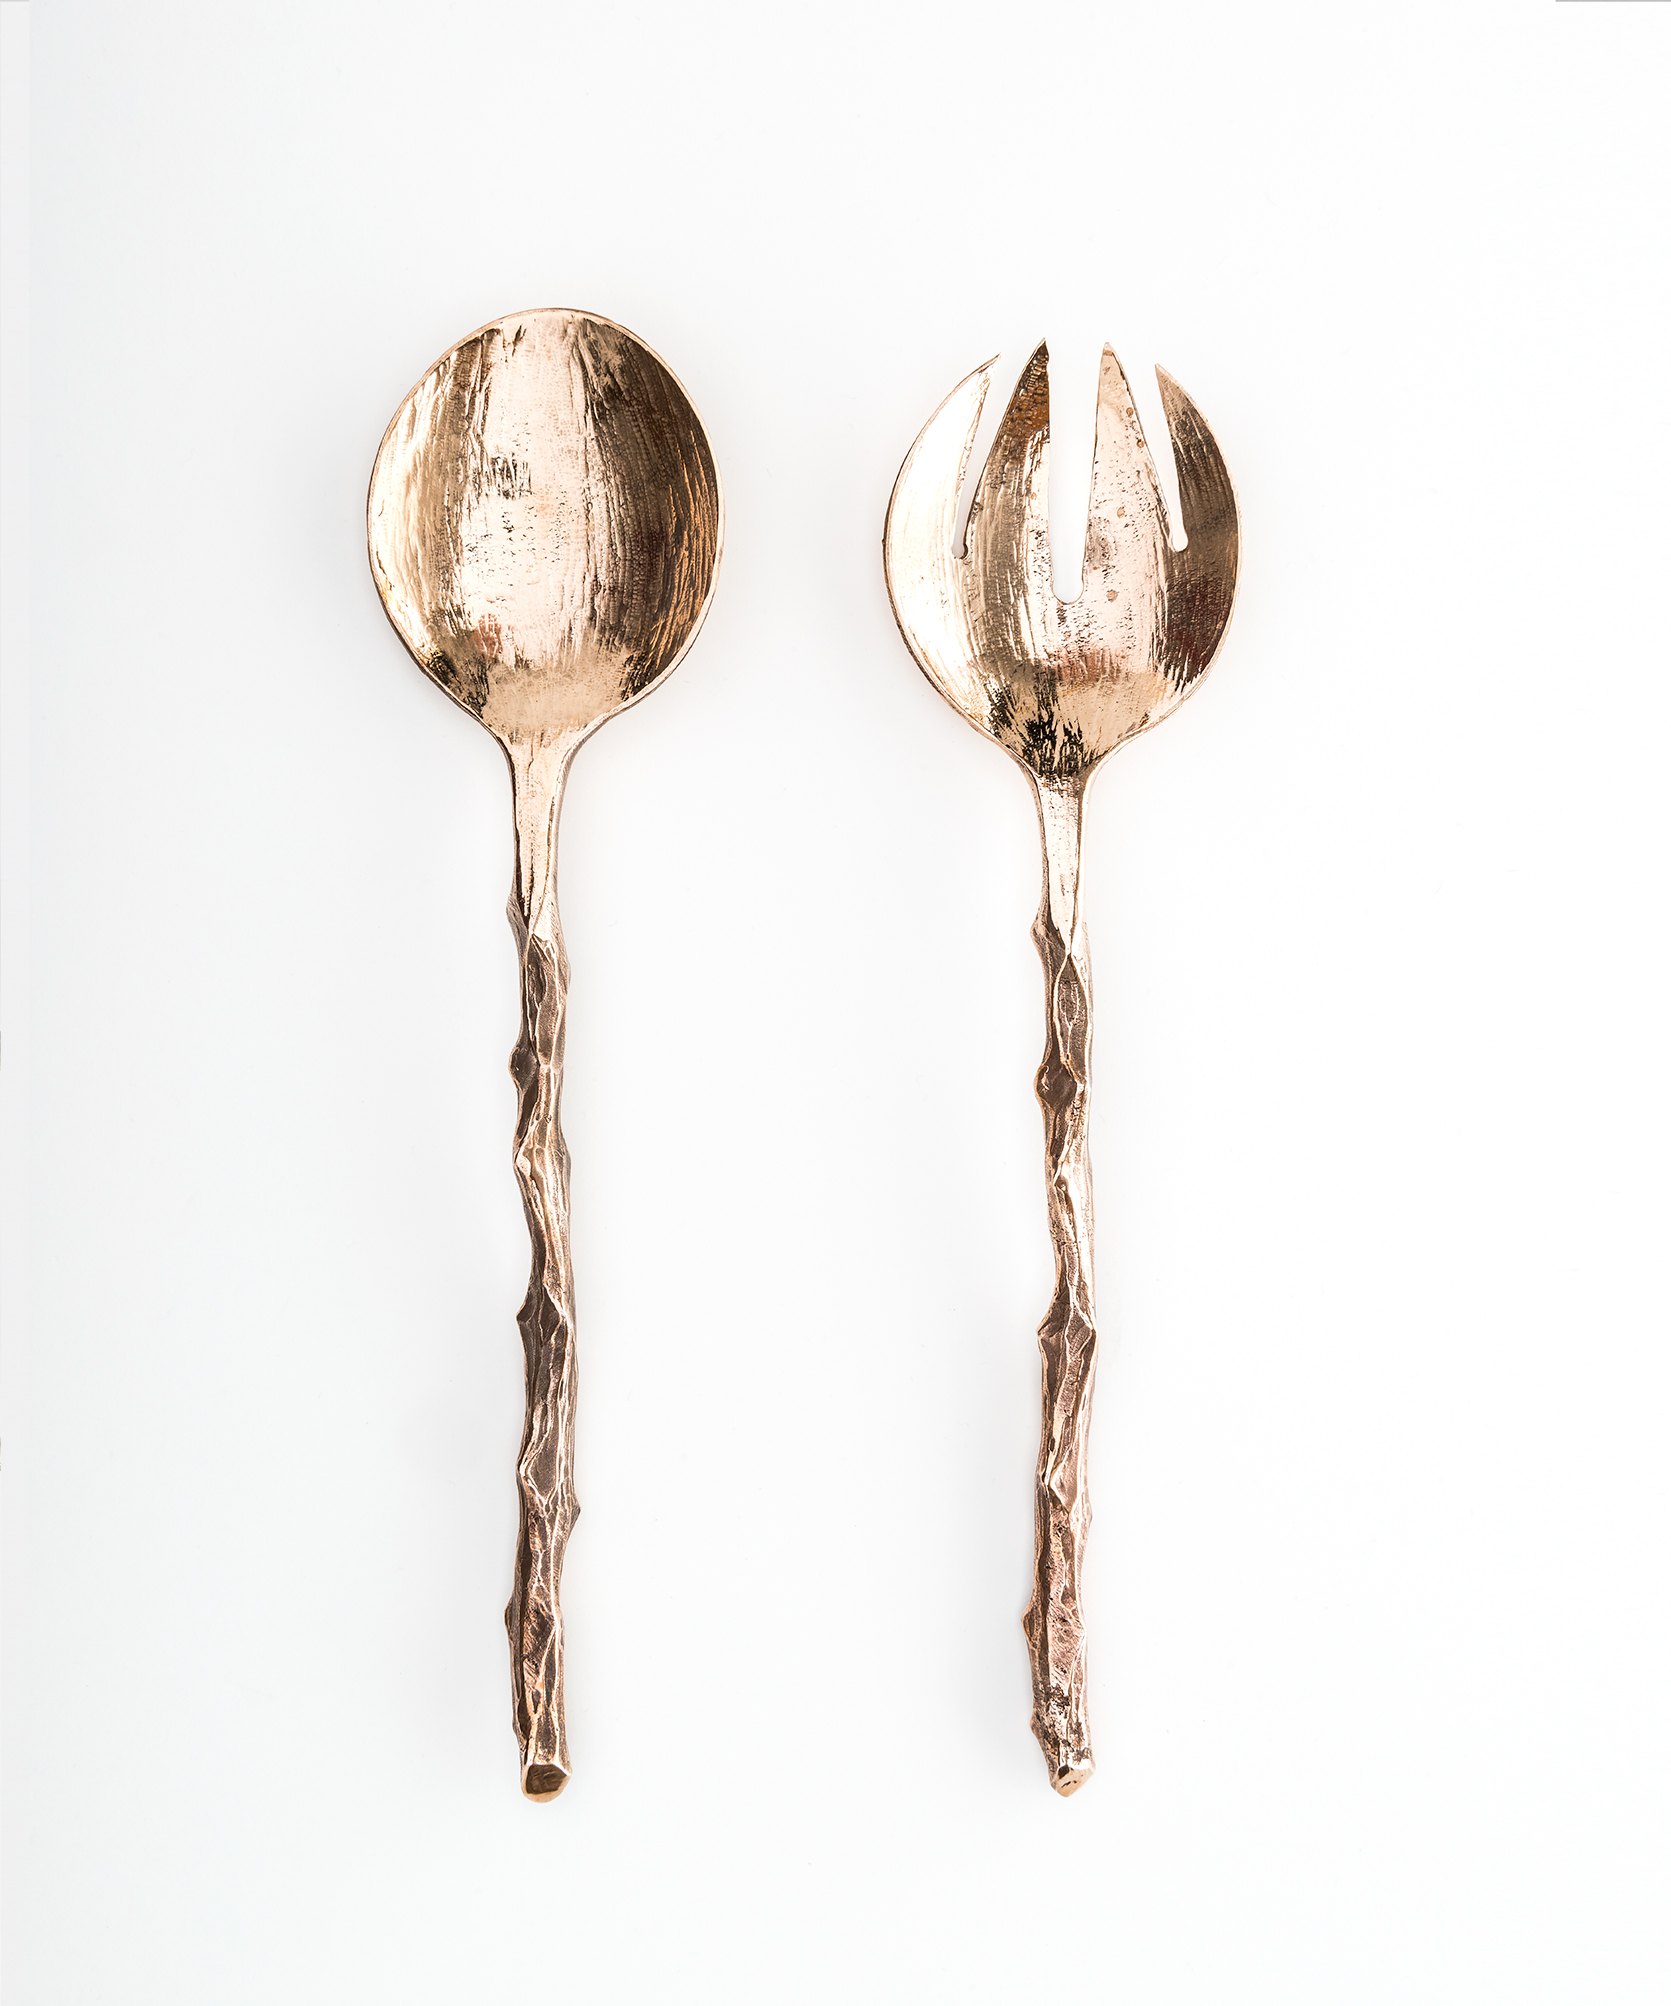 Rose Branch Risotto Serving Spoons in Bronze